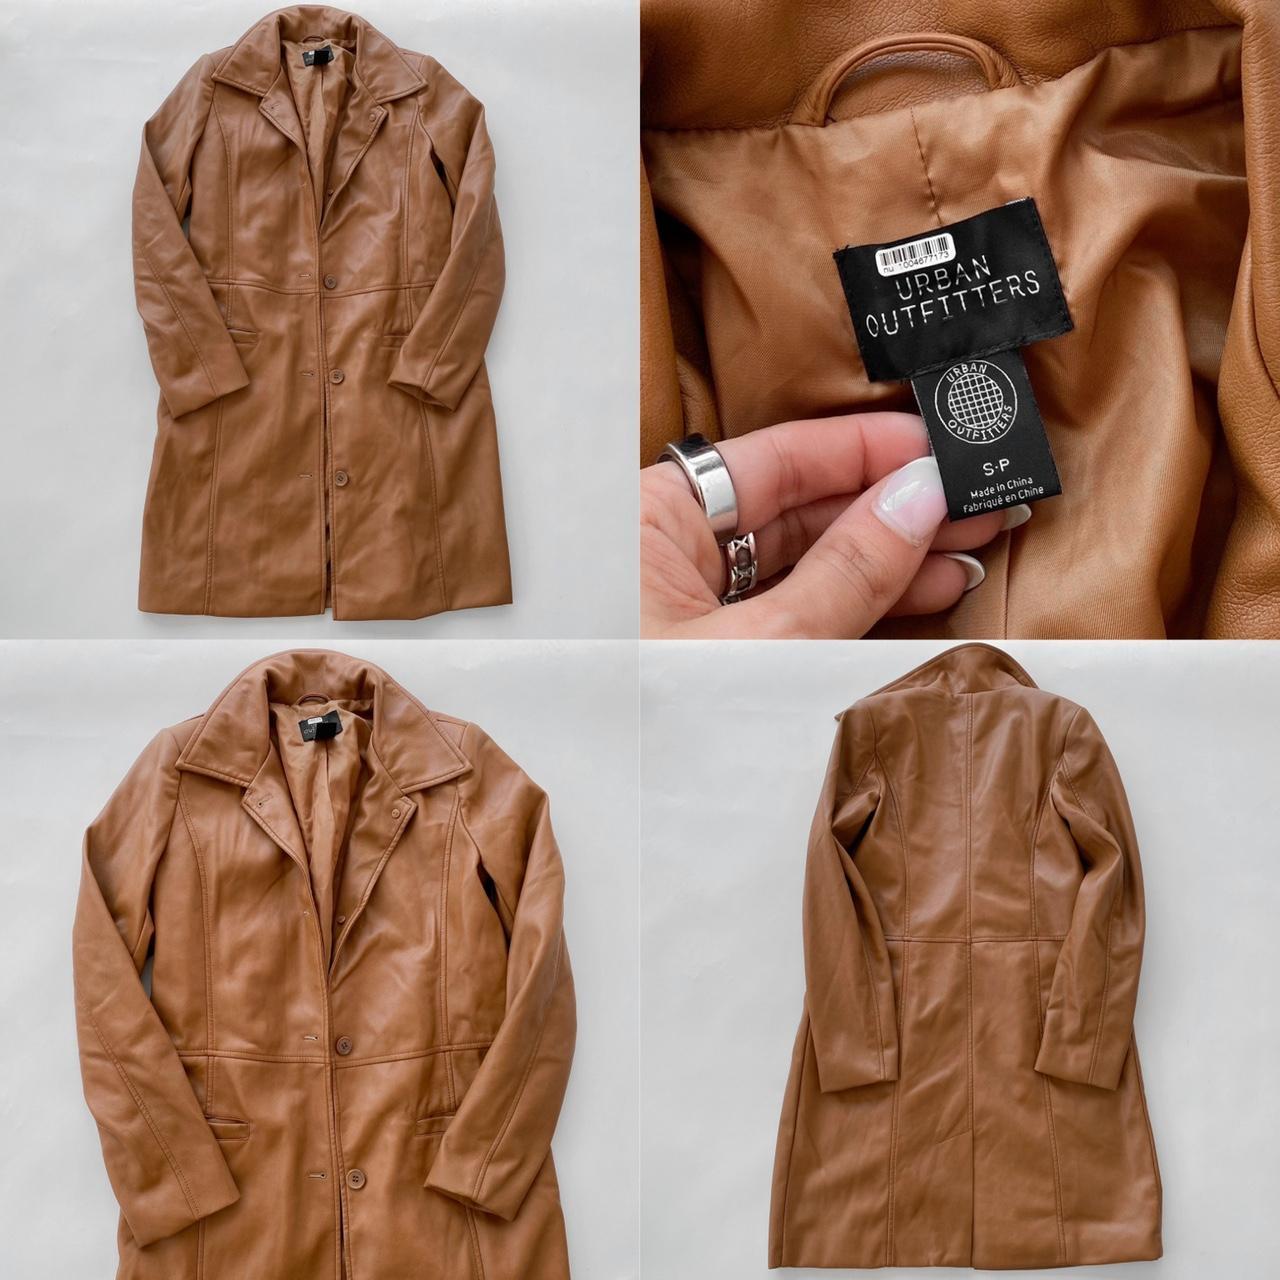 Urban Outfitters Women's Brown and Tan Coat (4)